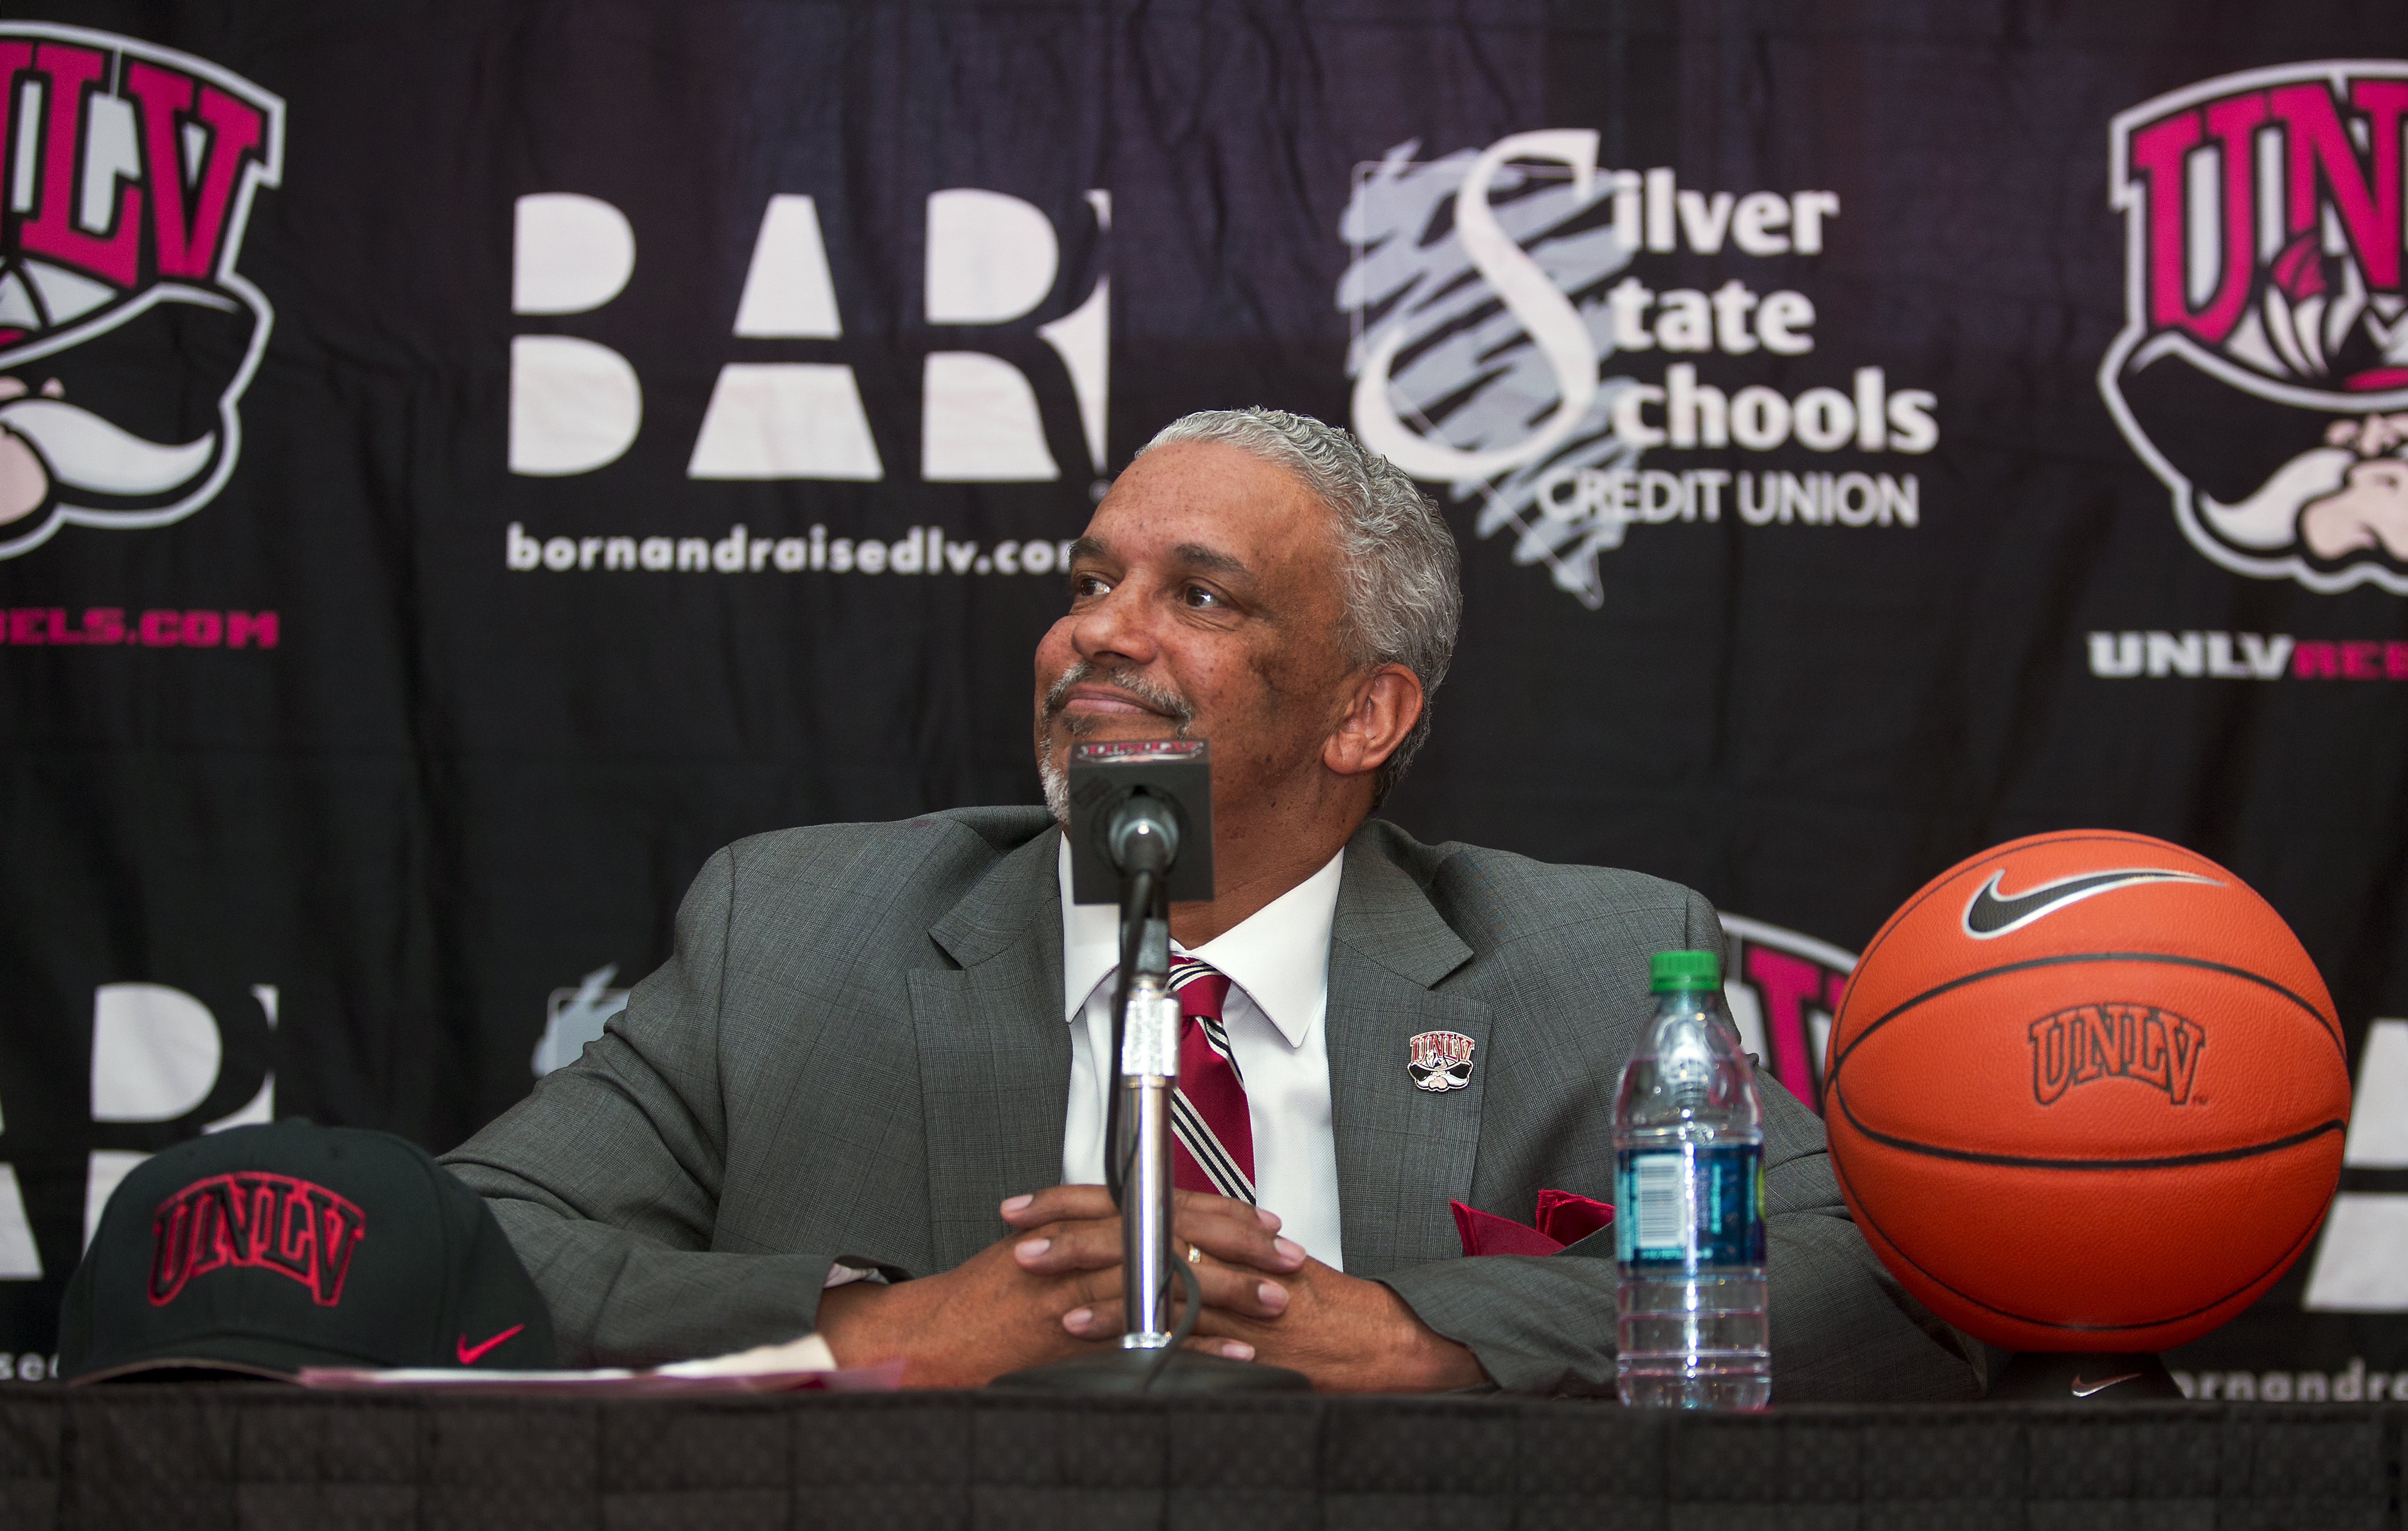 New UNLV men's basketball coach Marvin Menzies smiles during a news conference after the UNLV board of regents approved his contract, Friday, April 22, 2016 in Las Vegas. The boards voted 12-1 on Friday to approve a five-year, $3.75 million deal for Menzies. (L.E. Baskow/Las Vegas Sun via AP) LAS VEGAS REVIEW-JOURNAL OUT; MANDATORY CREDIT